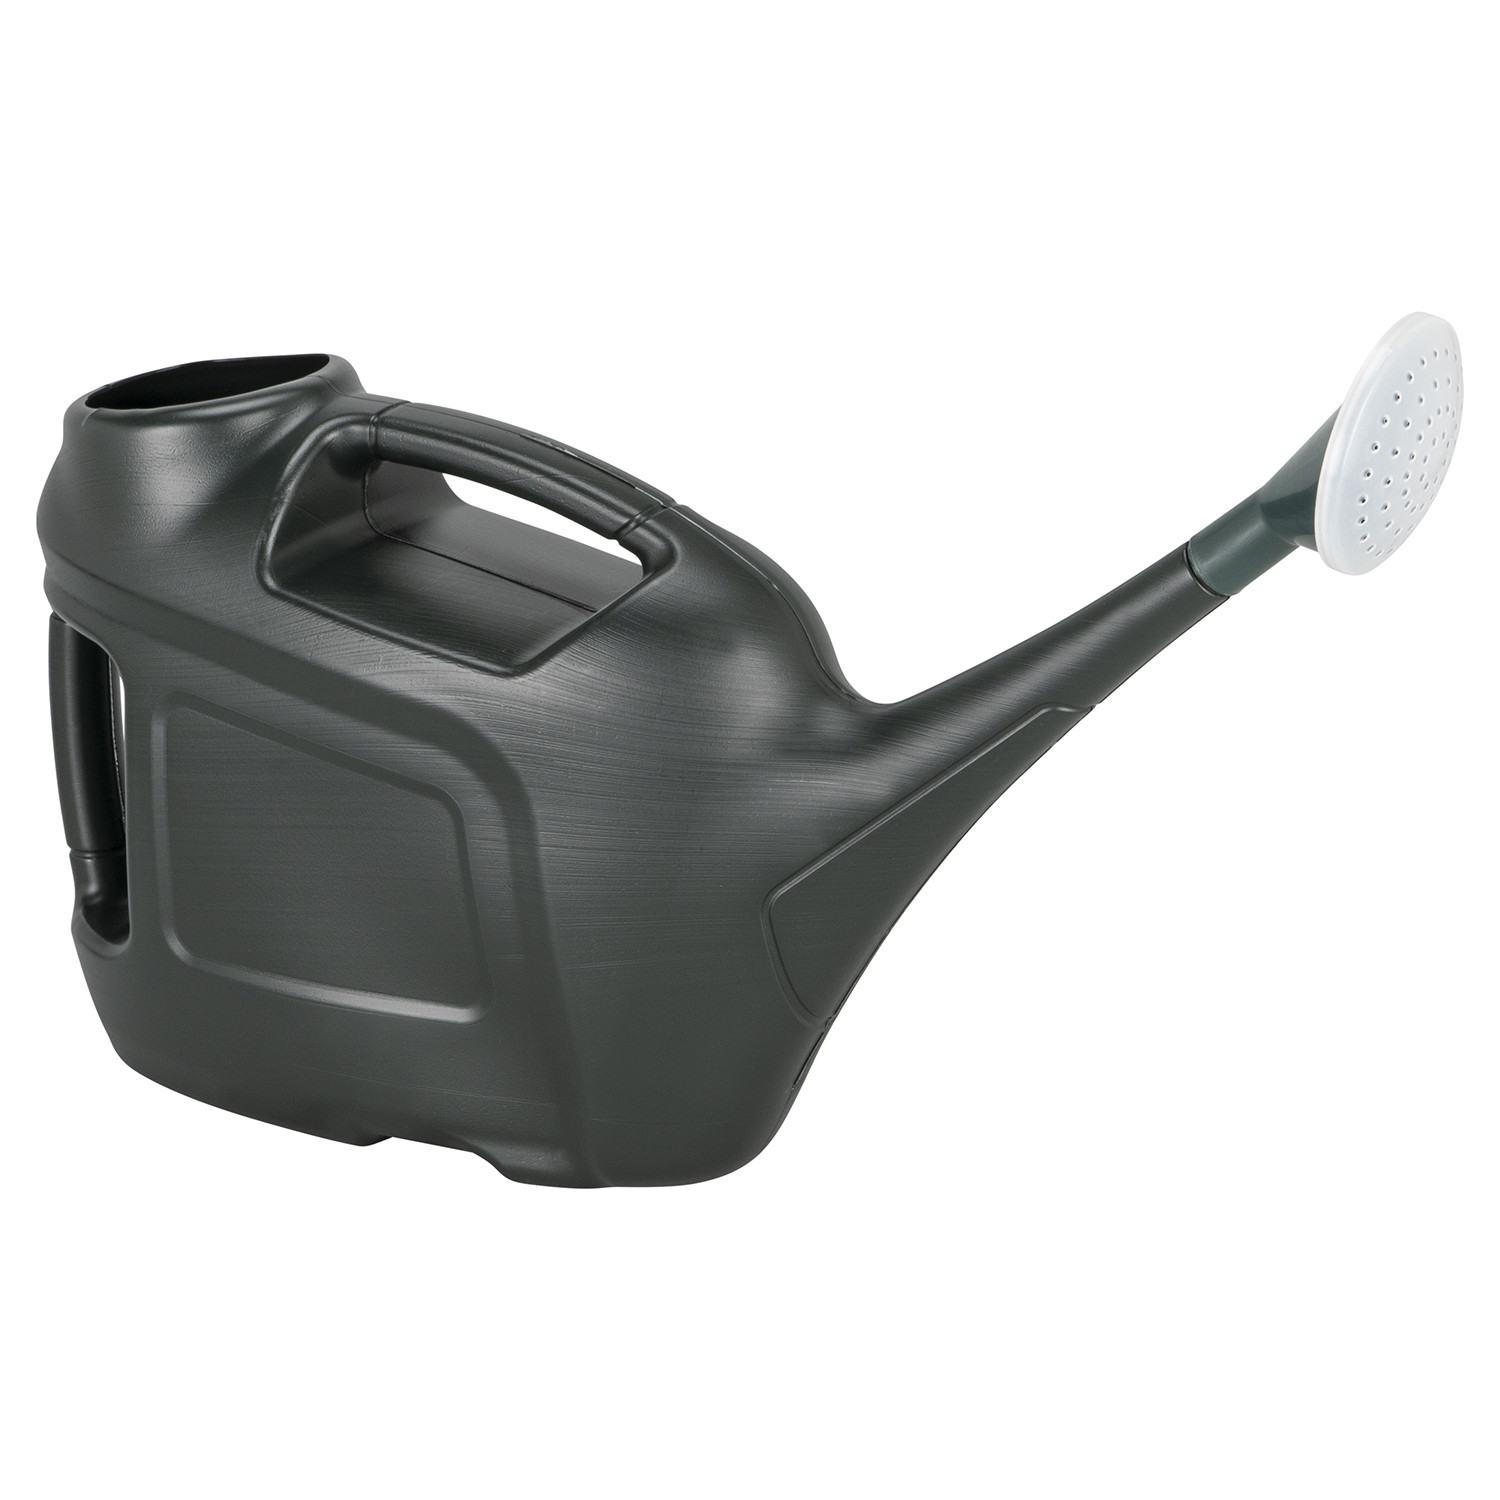 Green Watering Can 6L Image